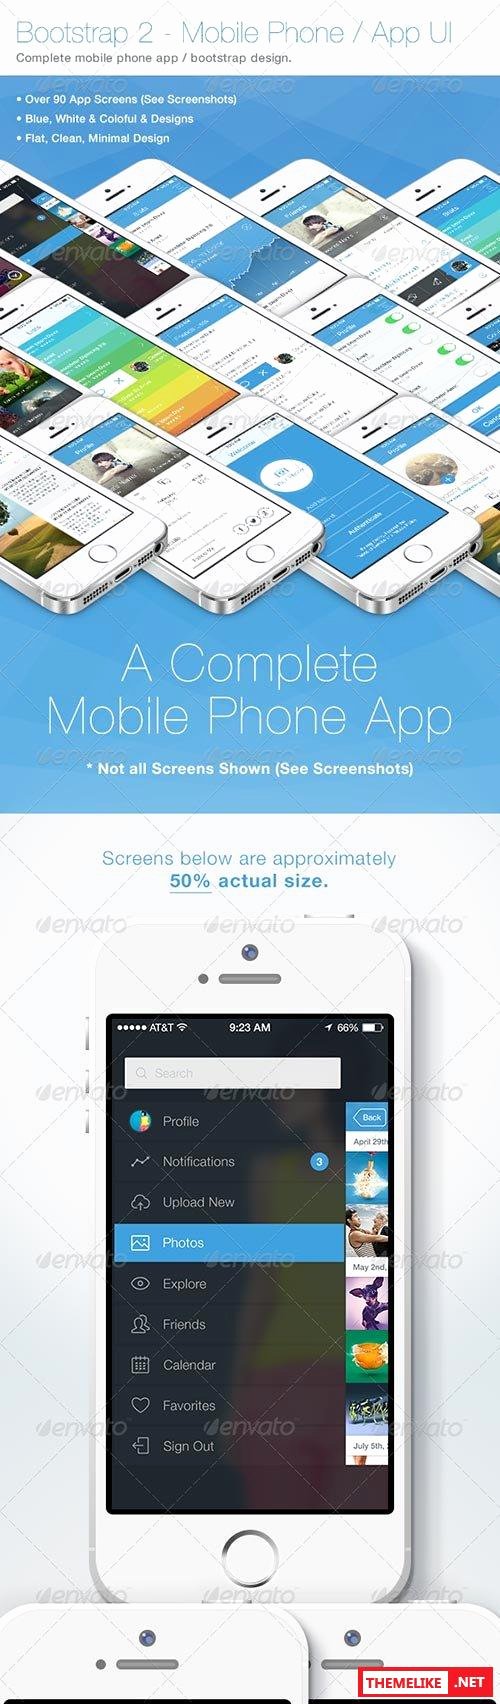 Bootstrap Mobile App Template Luxury Graphicriver Bootstrap 2 Mobile Phone App Ui